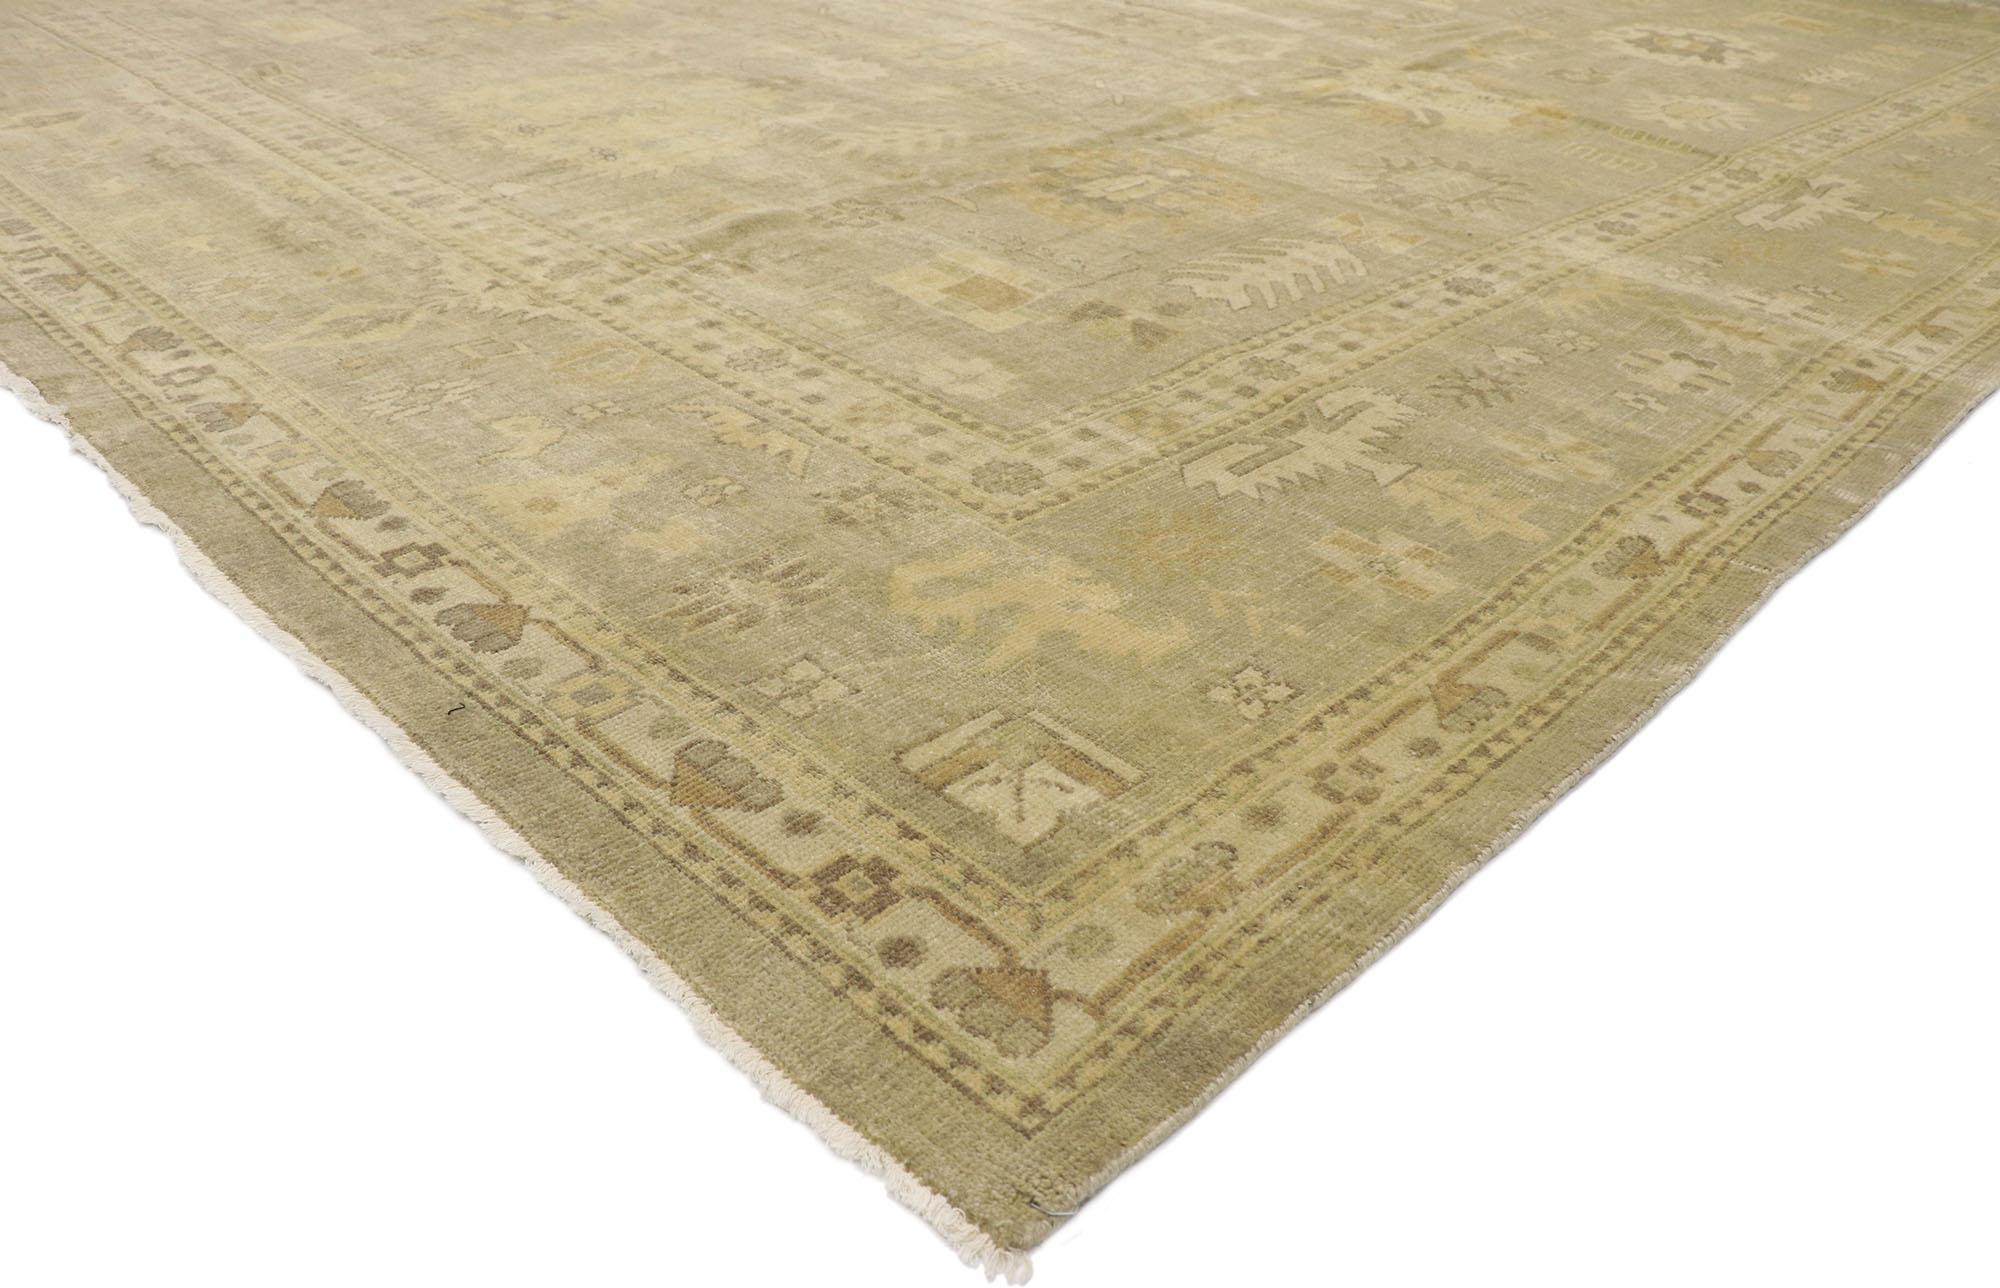 30183 new contemporary Oushak rug with transitional style and neutral colors. This hand knotted wool new contemporary Oushak rug features an all-over botanical pattern composed of Harshang-style motifs, cubes, comb motifs, tree of life designs,